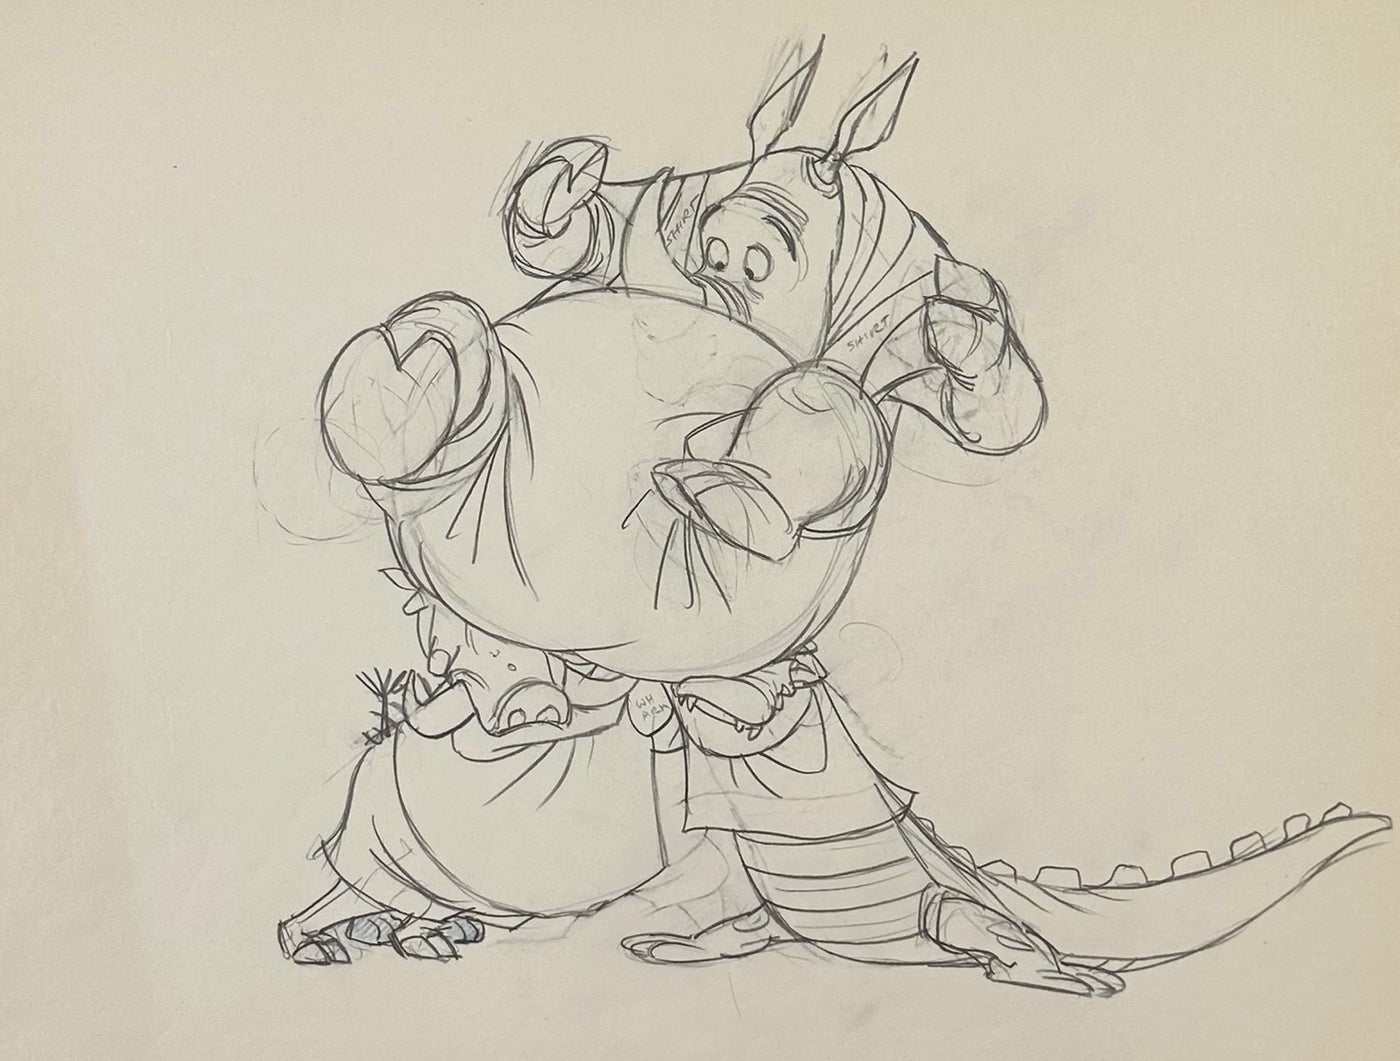 Original Walt Disney Production Drawing from Bedknobs and Broomsticks